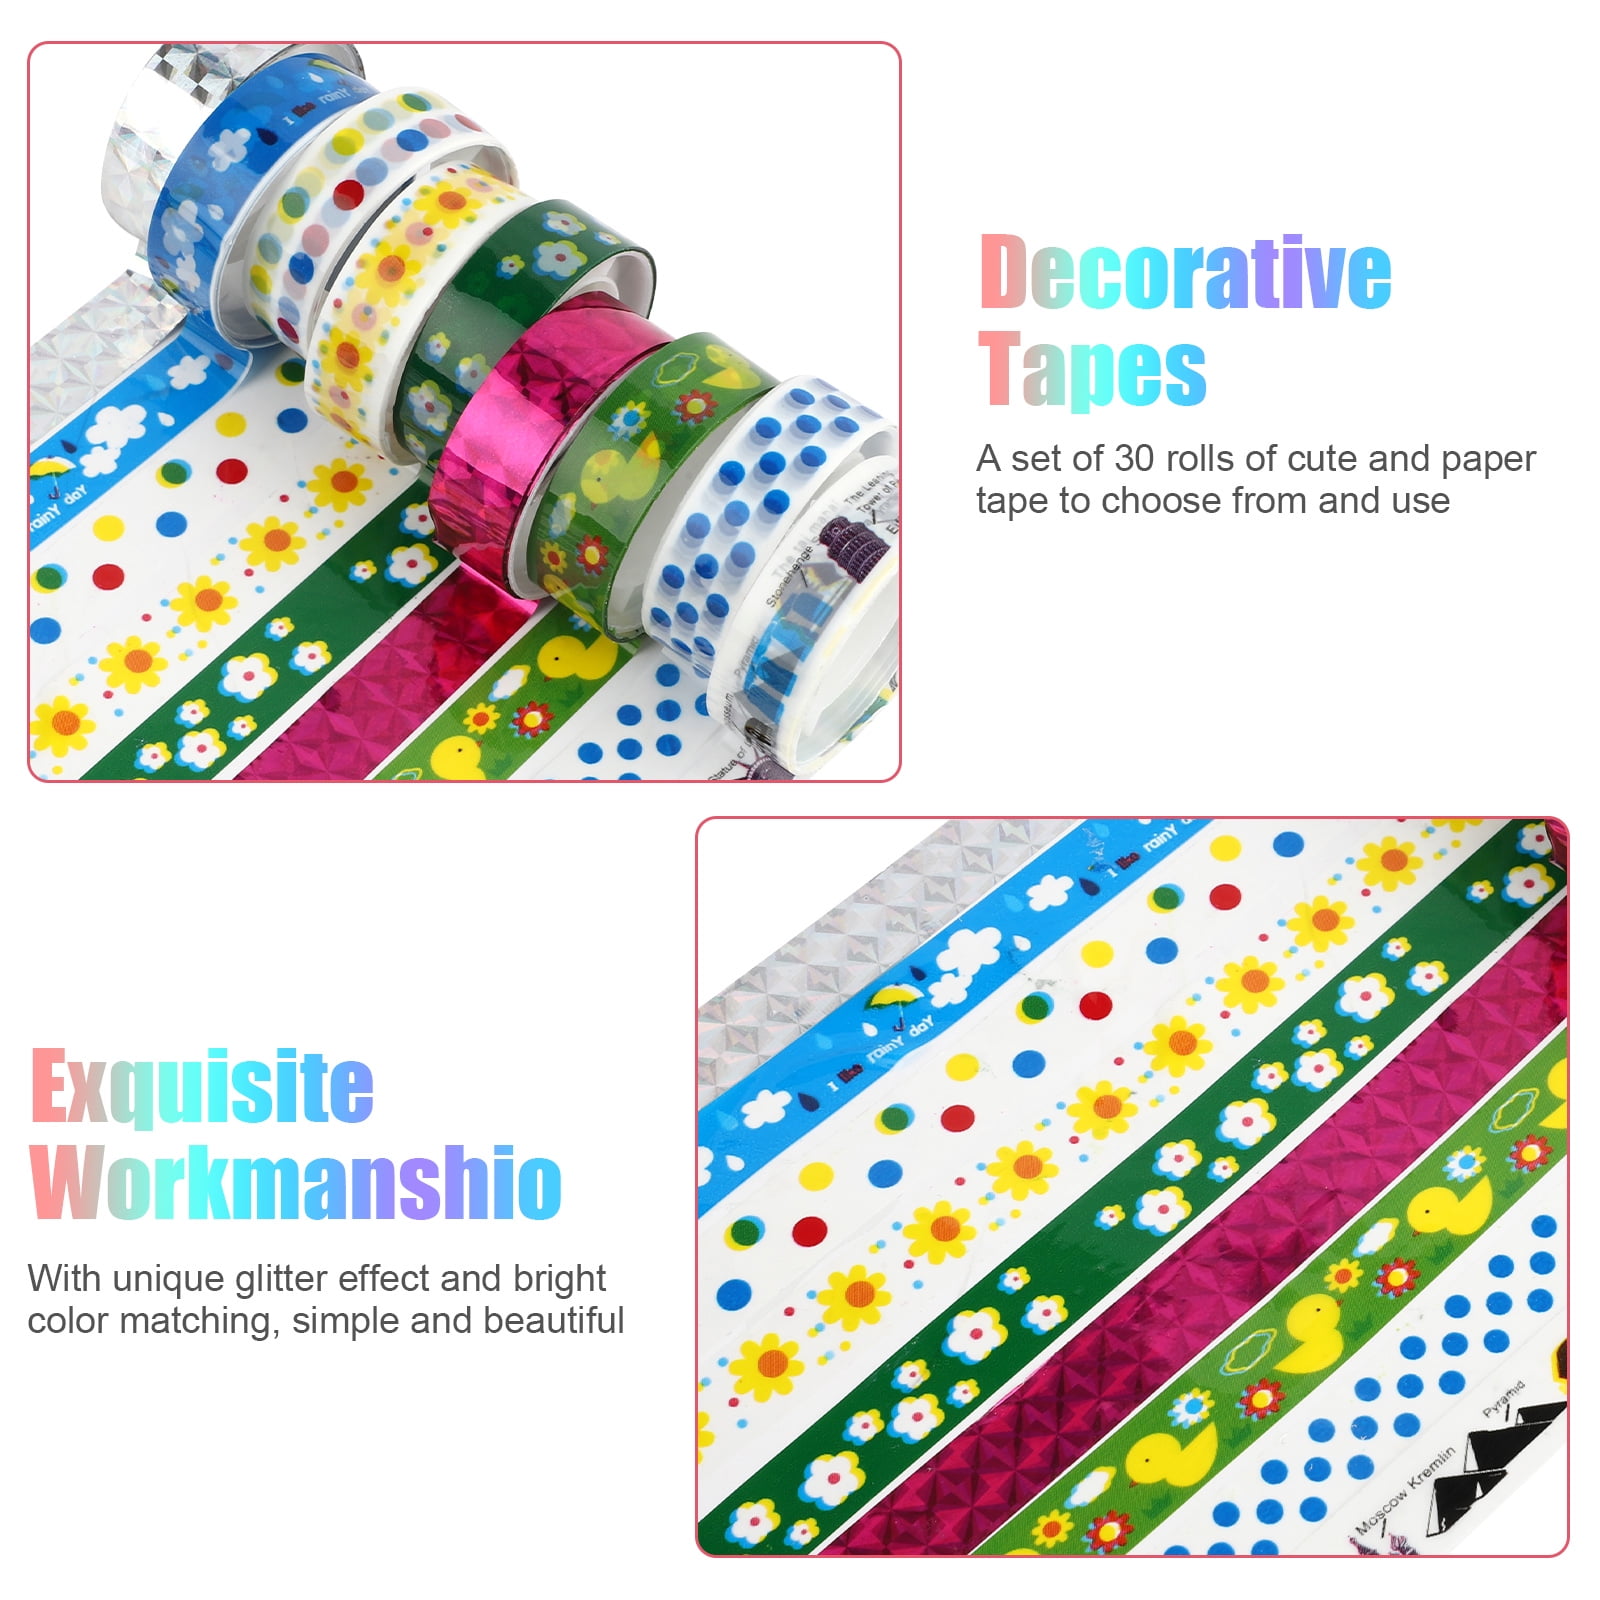 Mozart Supplies Washi Tape Set - 20 Rolls of Decorative Adhesive with Unique Colorful, Glitter, Floral, Foil Tape Designs - Journal Decorating, Scrapb